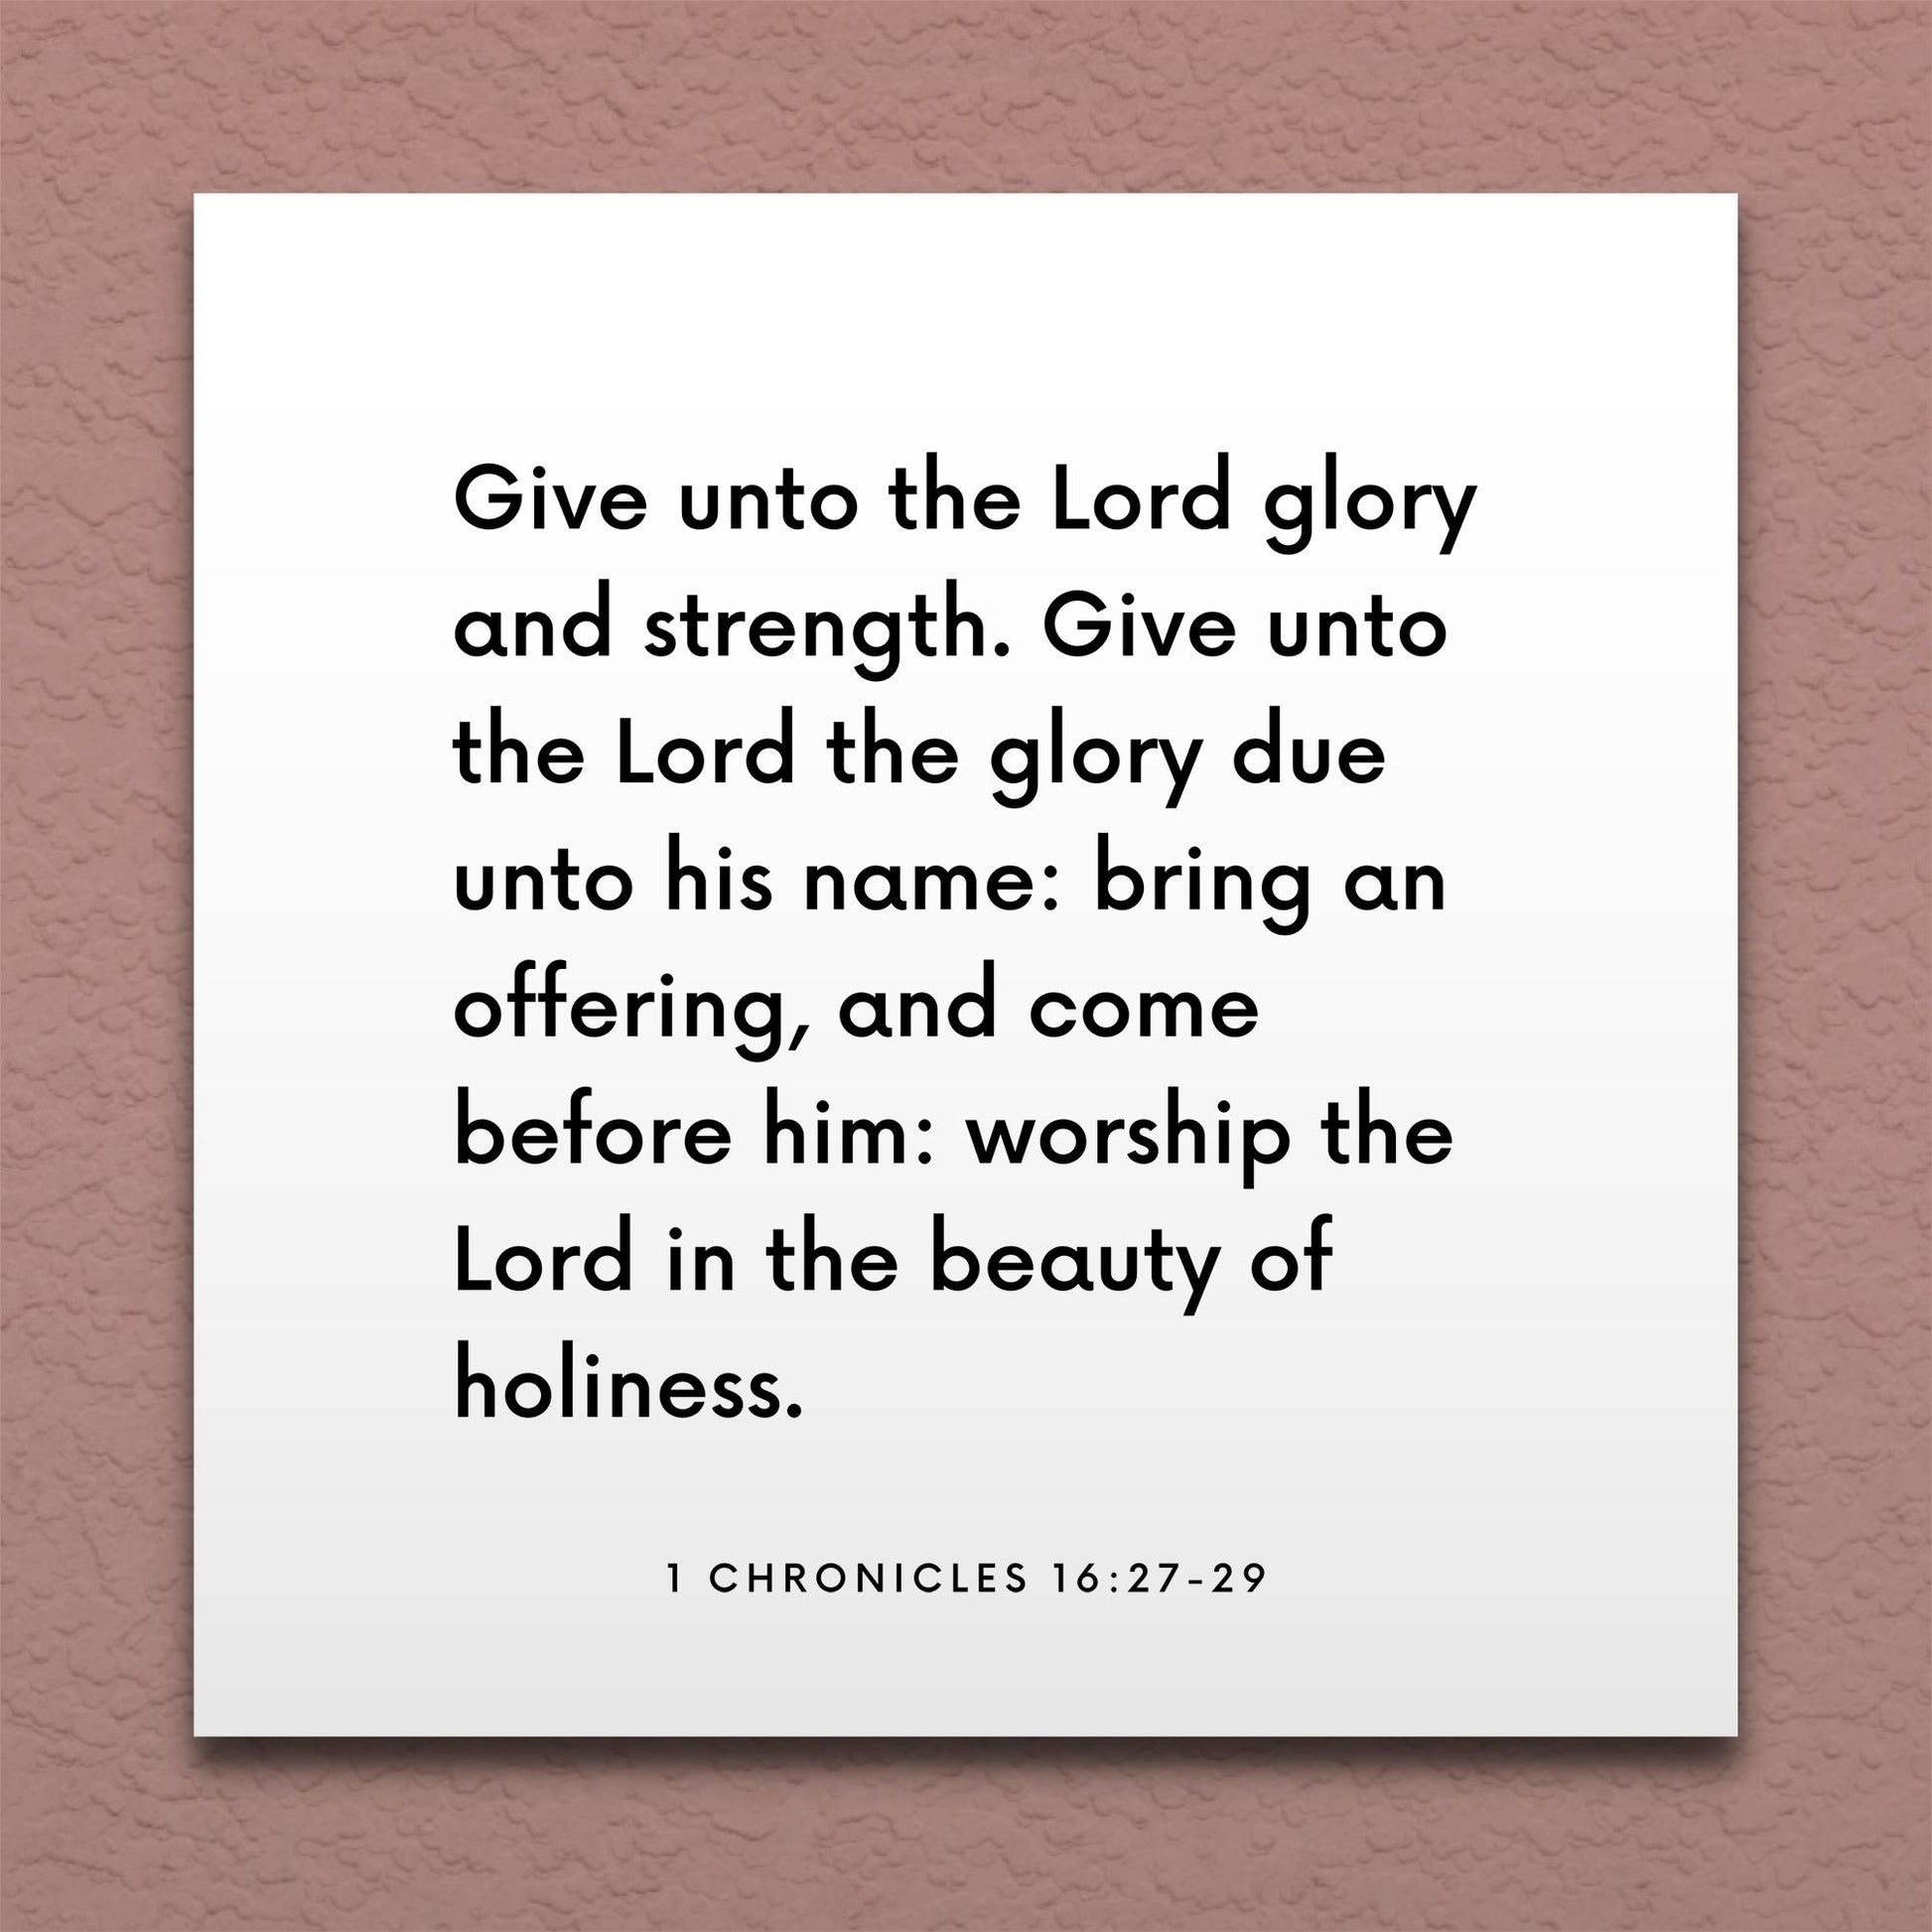 Wall-mounted scripture tile for 1 Chronicles 16:27-29 - "Give unto the Lord glory and strength"